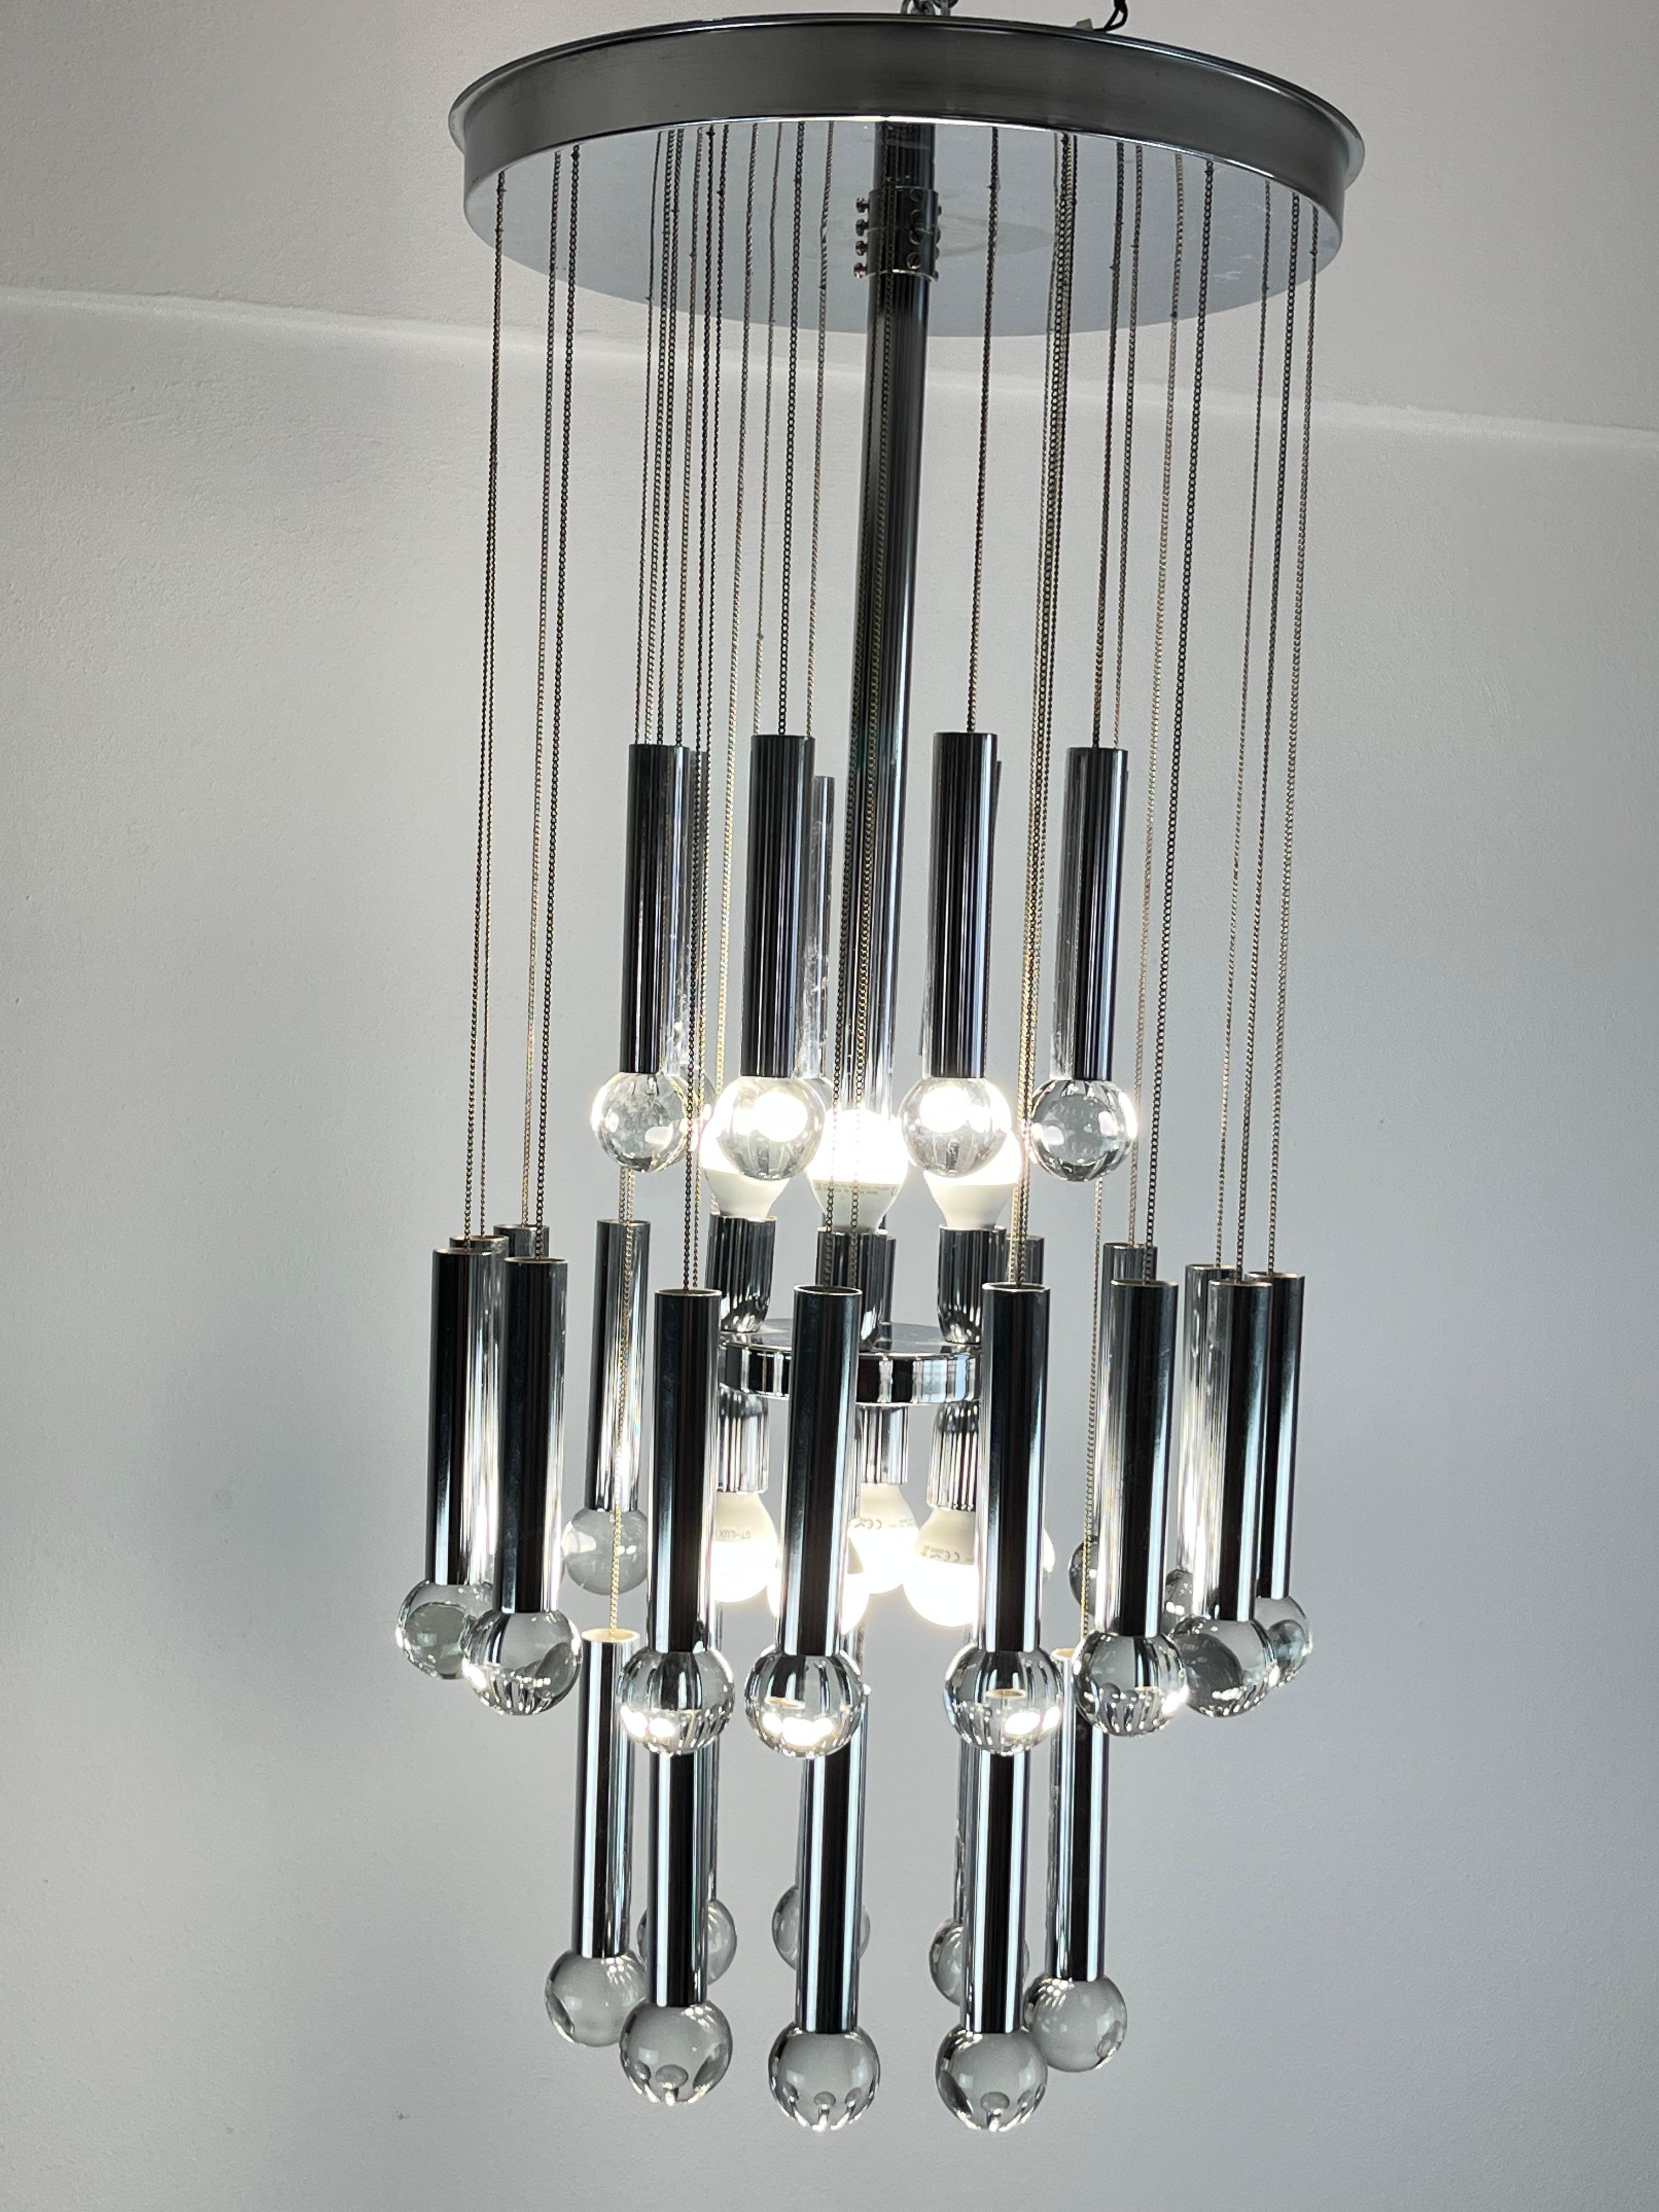 Other Eight-Light Steel and Glass Chandelier by Gaetano Sciolari, Italy, 1970s For Sale